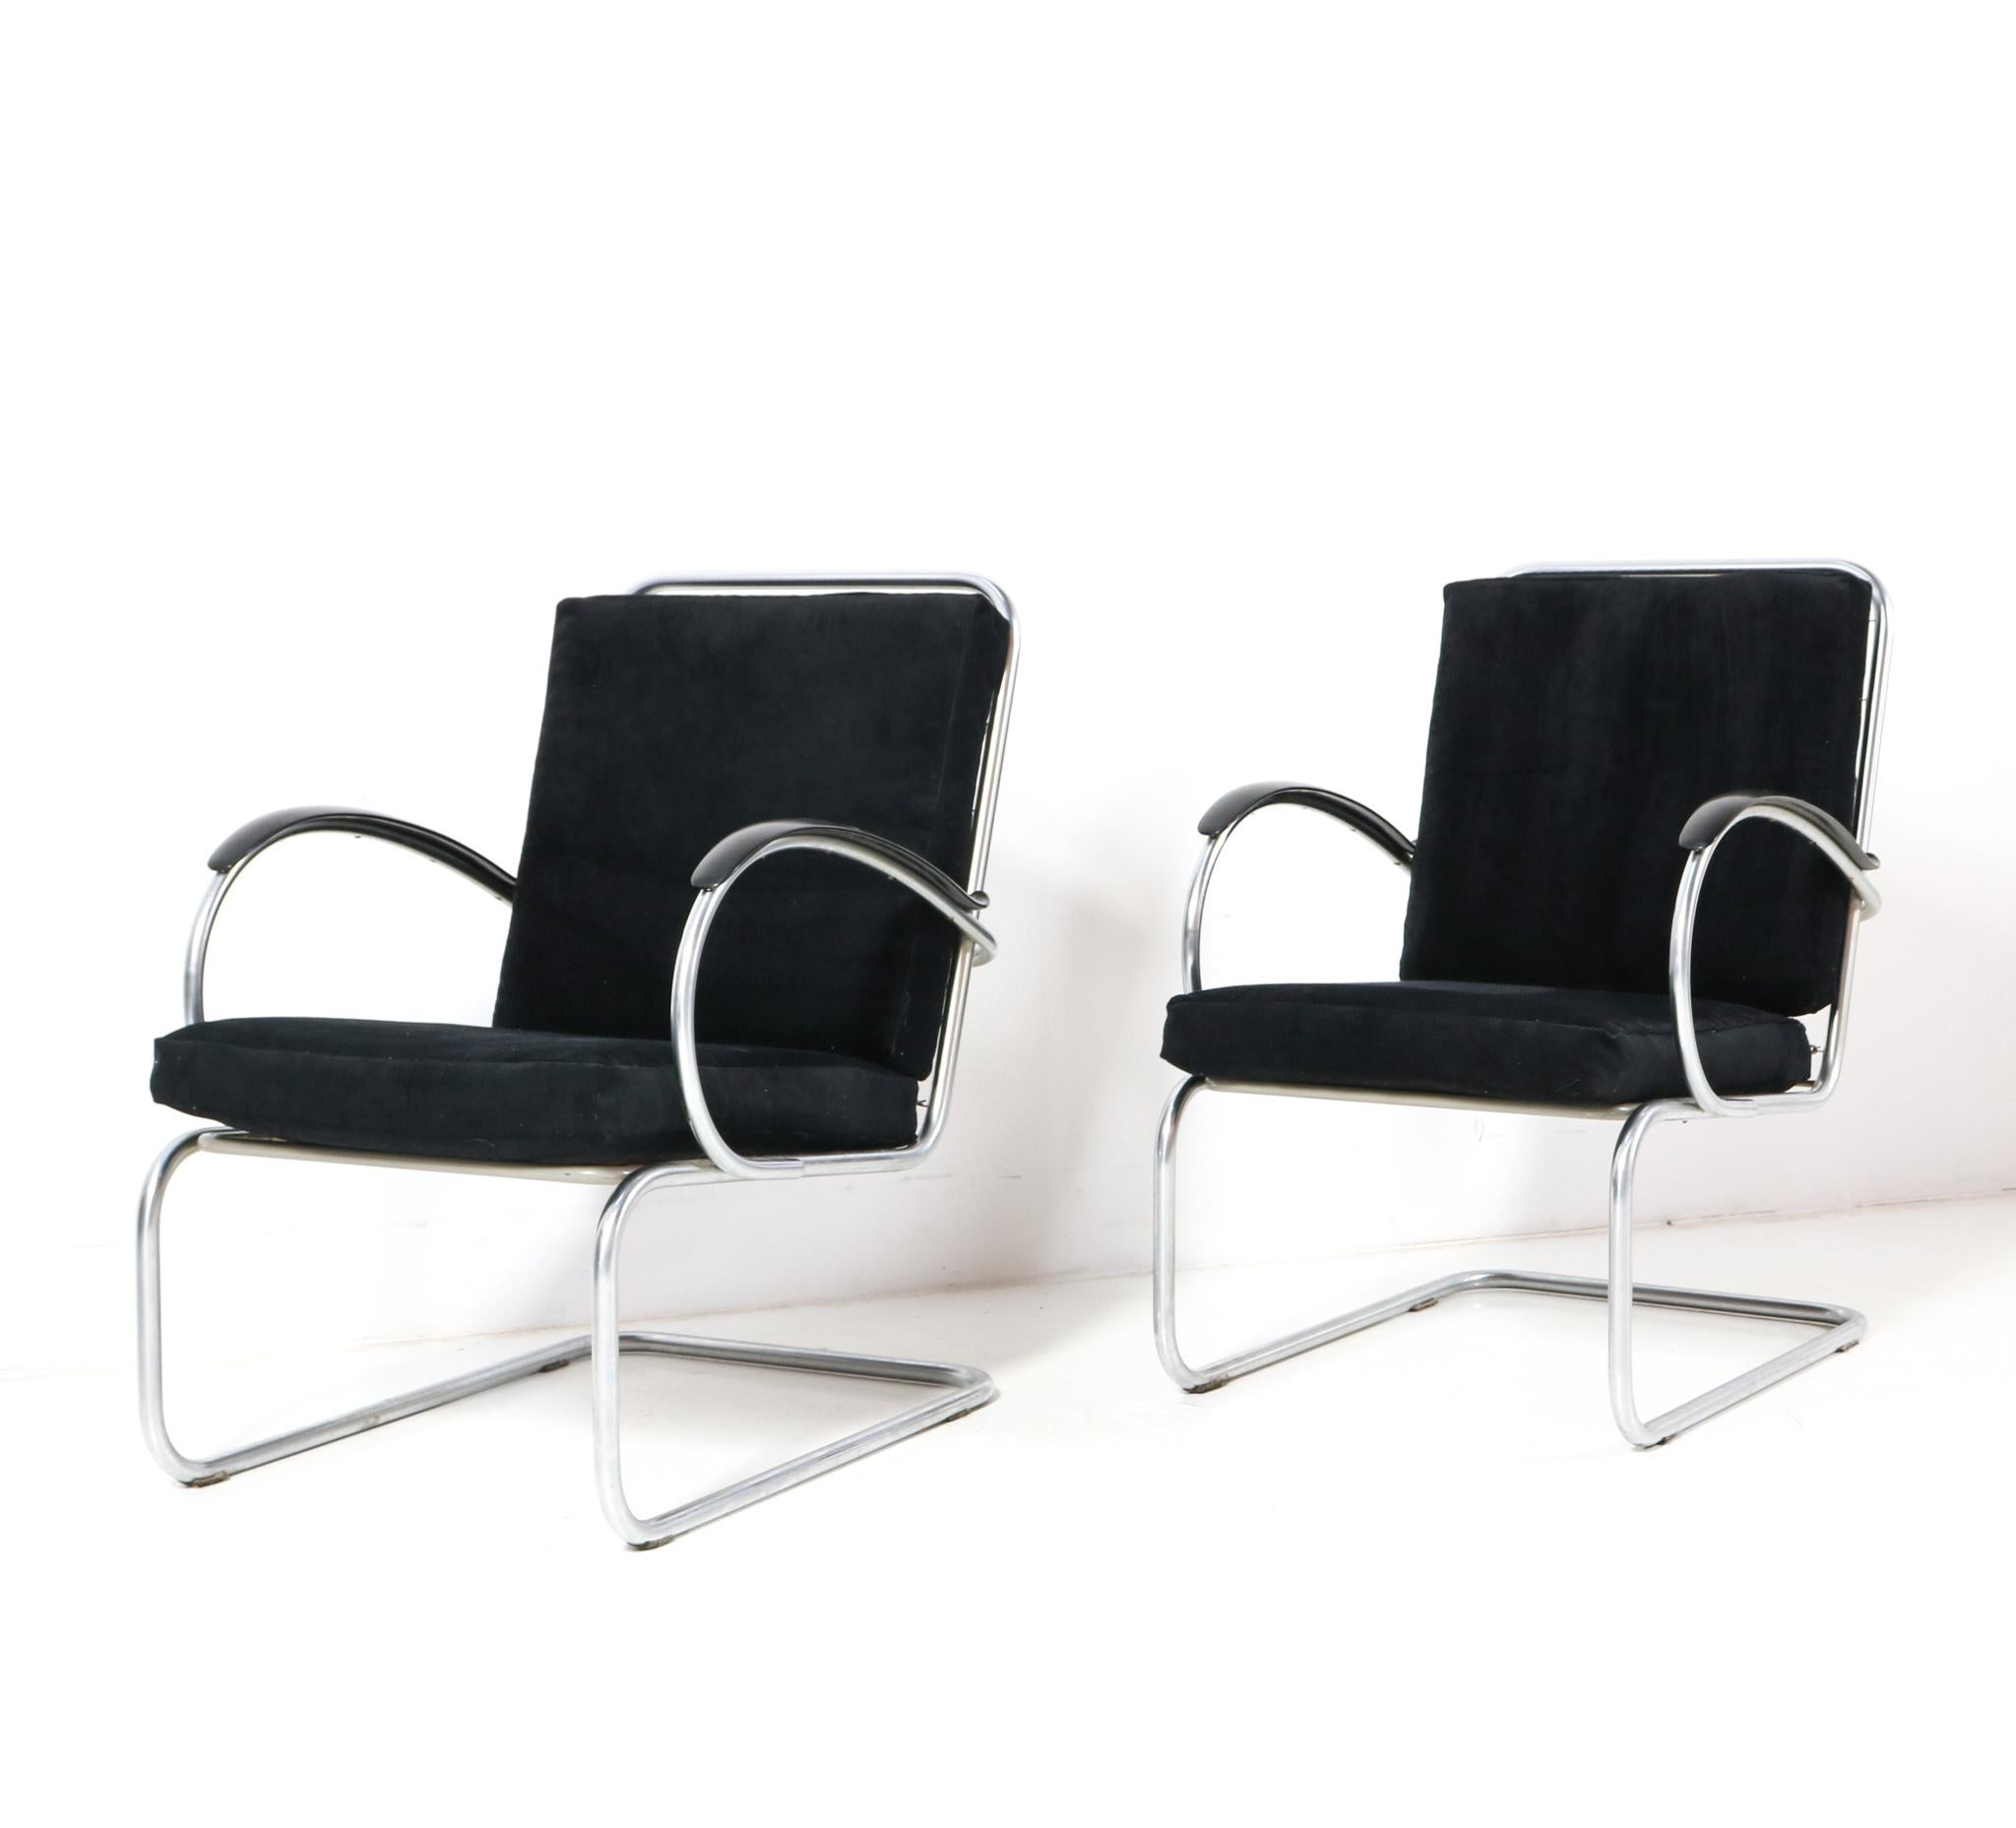 Magnificent and very hard to find pair of Art Deco Bauhaus Model 409 lounge chairs.
Design by Willem H. Gispen for Gispen.
Striking Dutch design from the 1930s.
Original cantilever chrome-plated tubular steel frames with original long bakelite